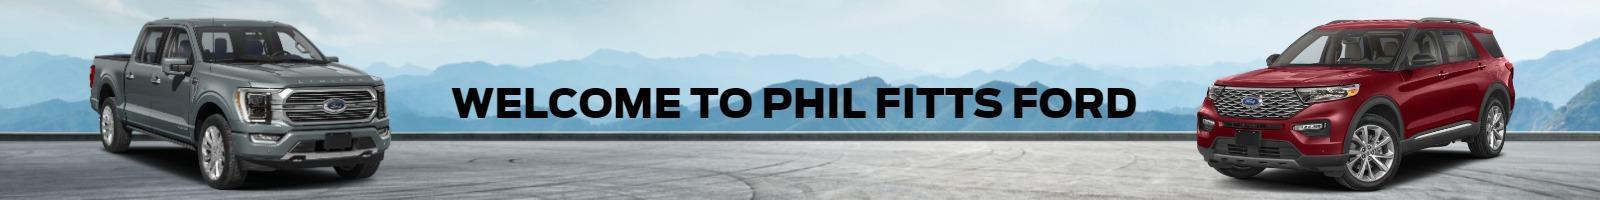 WELCOME TO PHIL FITTS FORD